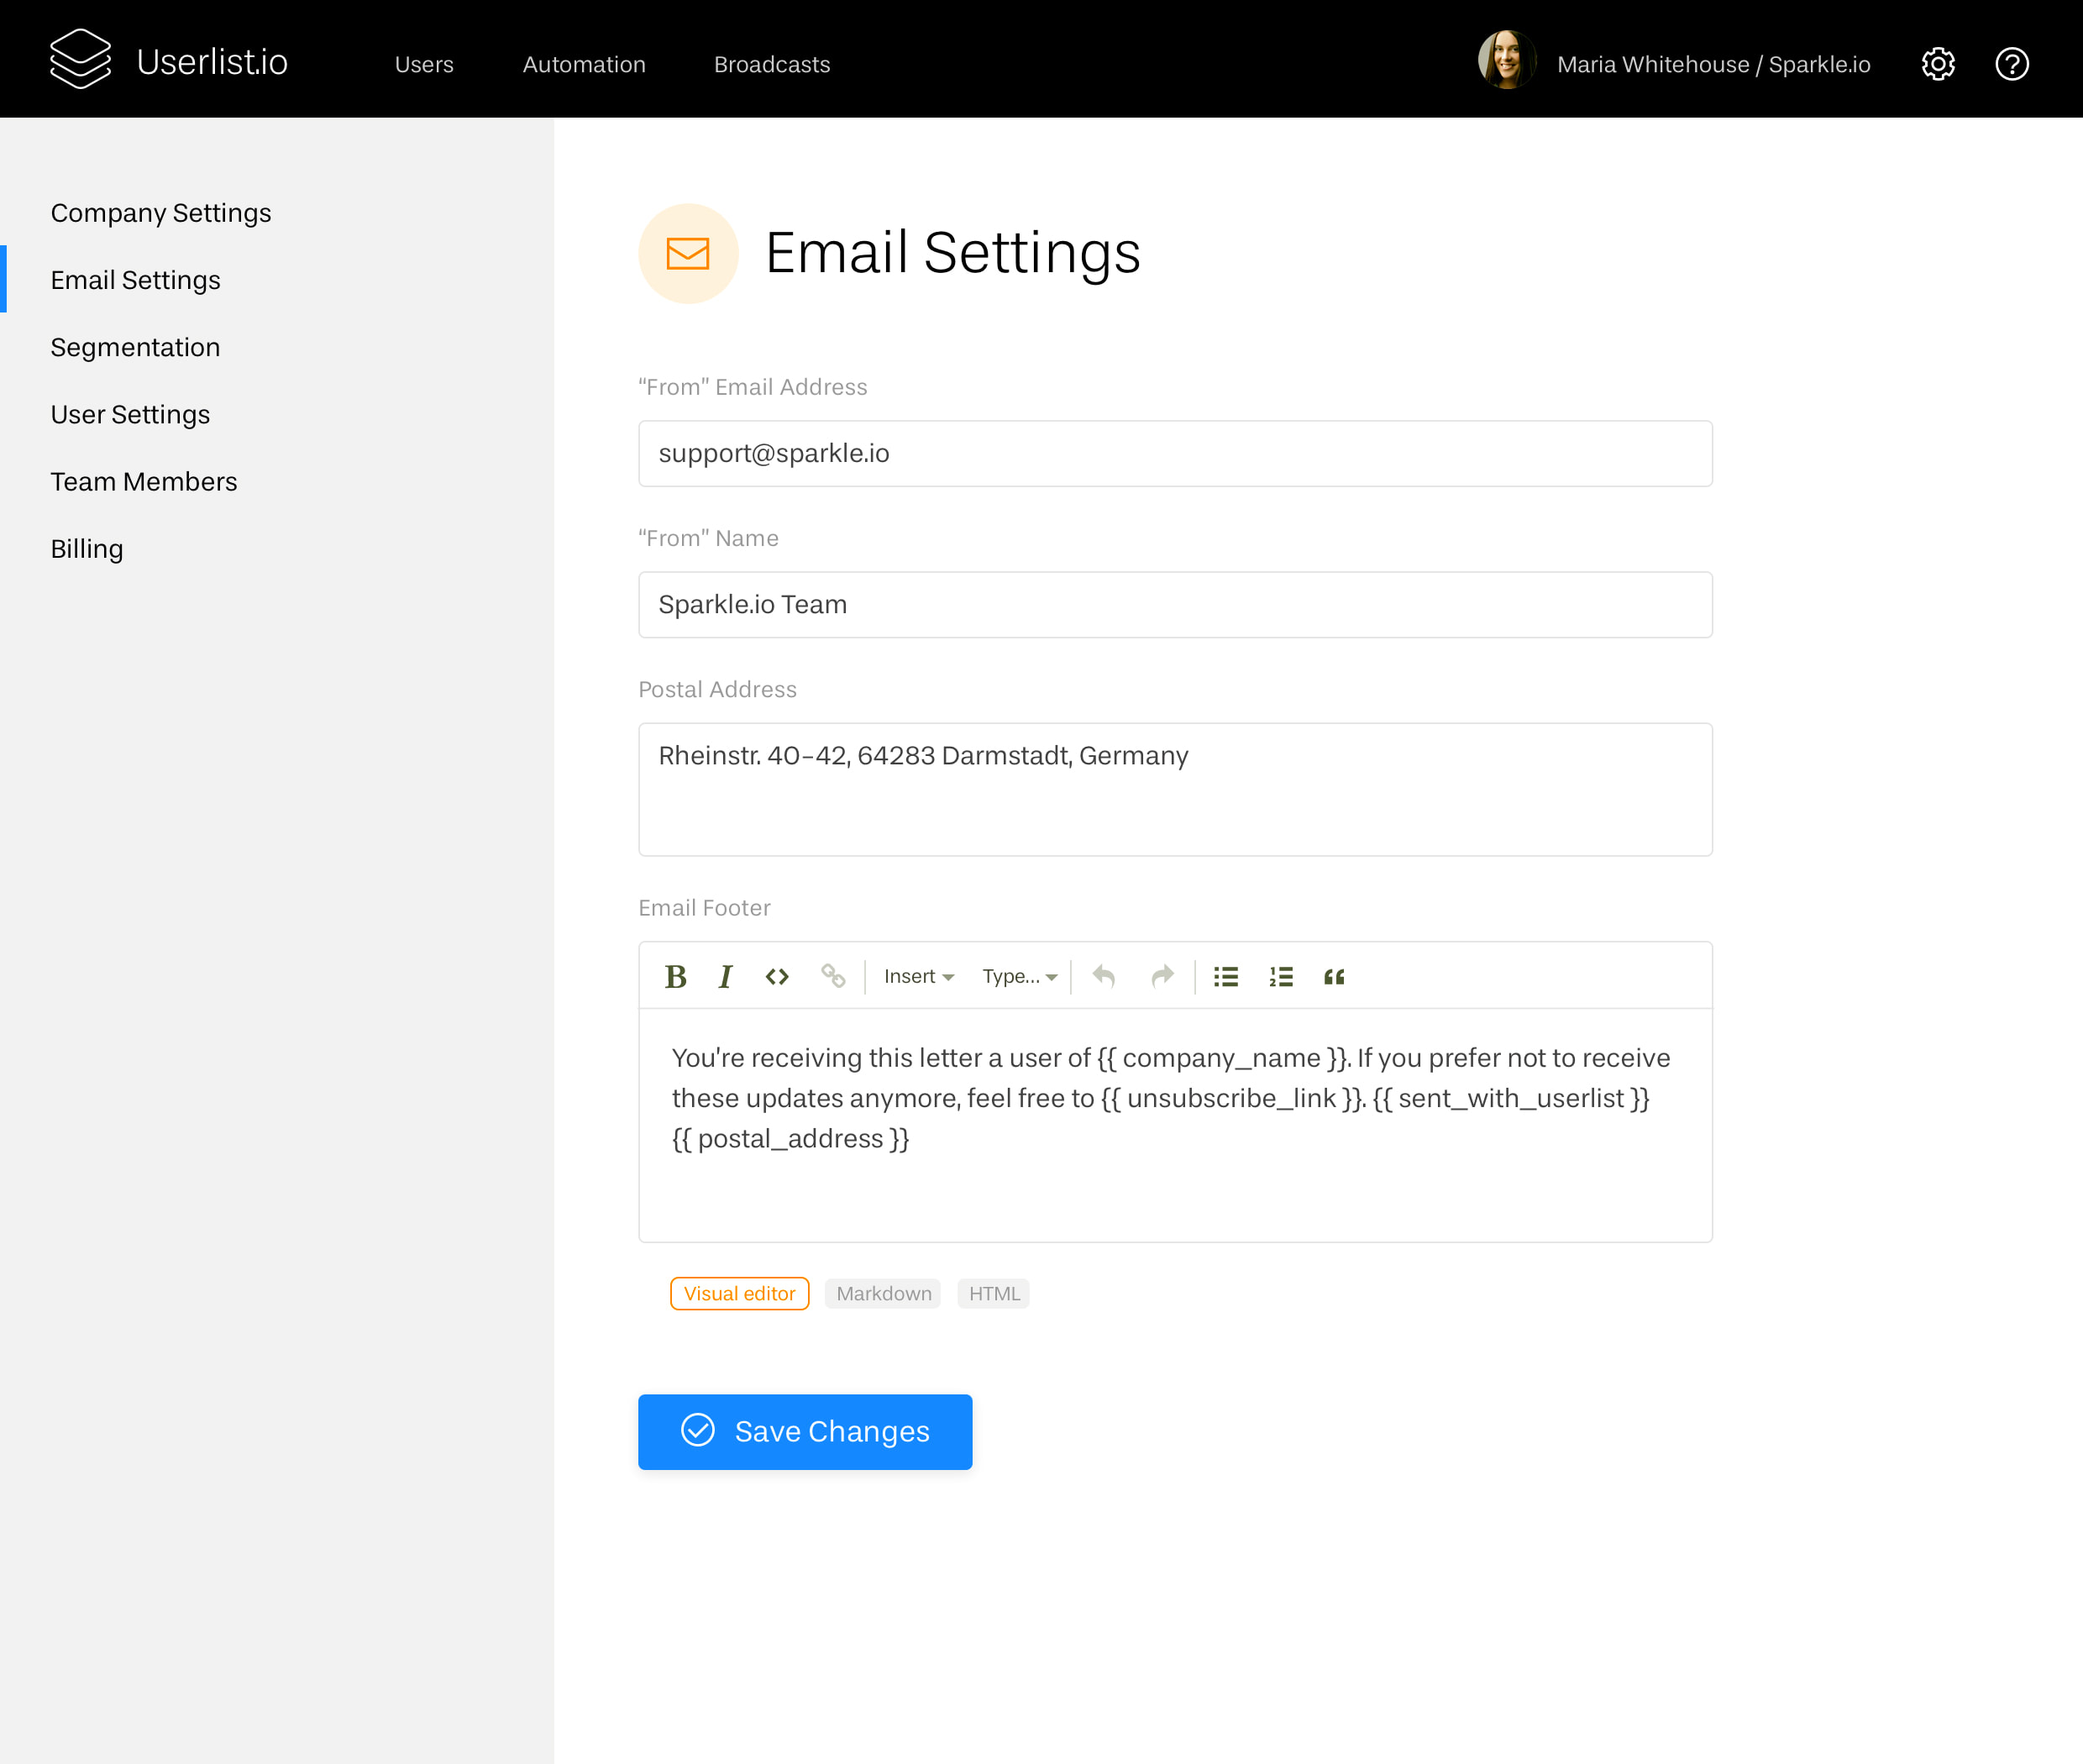 The Chicken or the Egg? Explaining Our Early Product Design Decisions: Screenshot of the email settings at Userlist